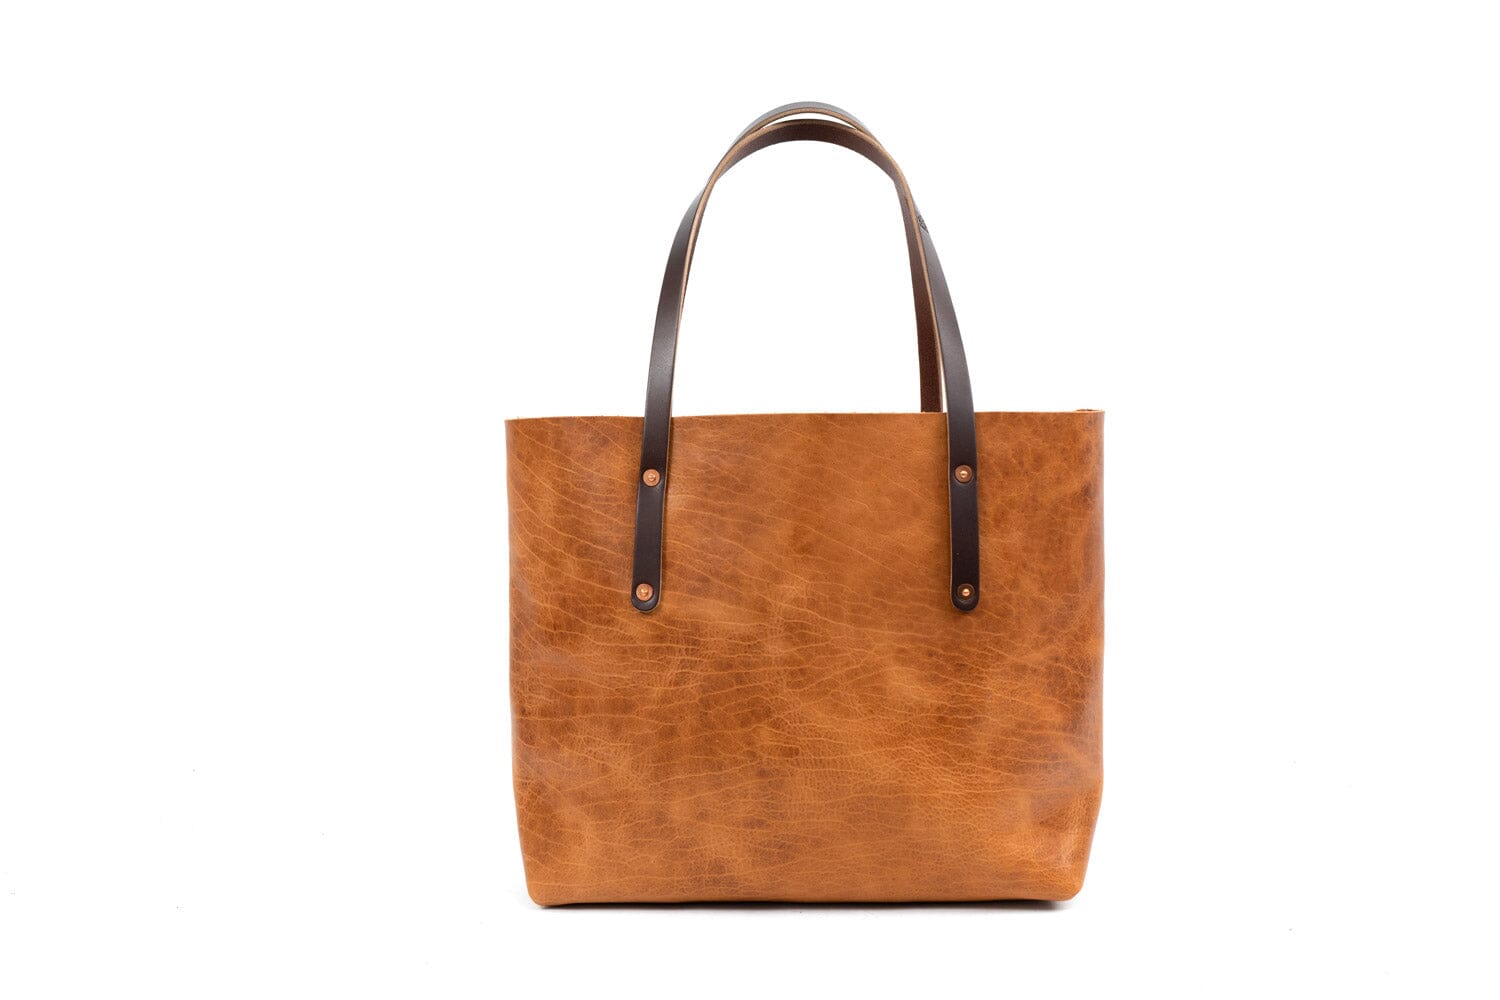 AVERY LEATHER TOTE BAG - LARGE - PEANUT BISON